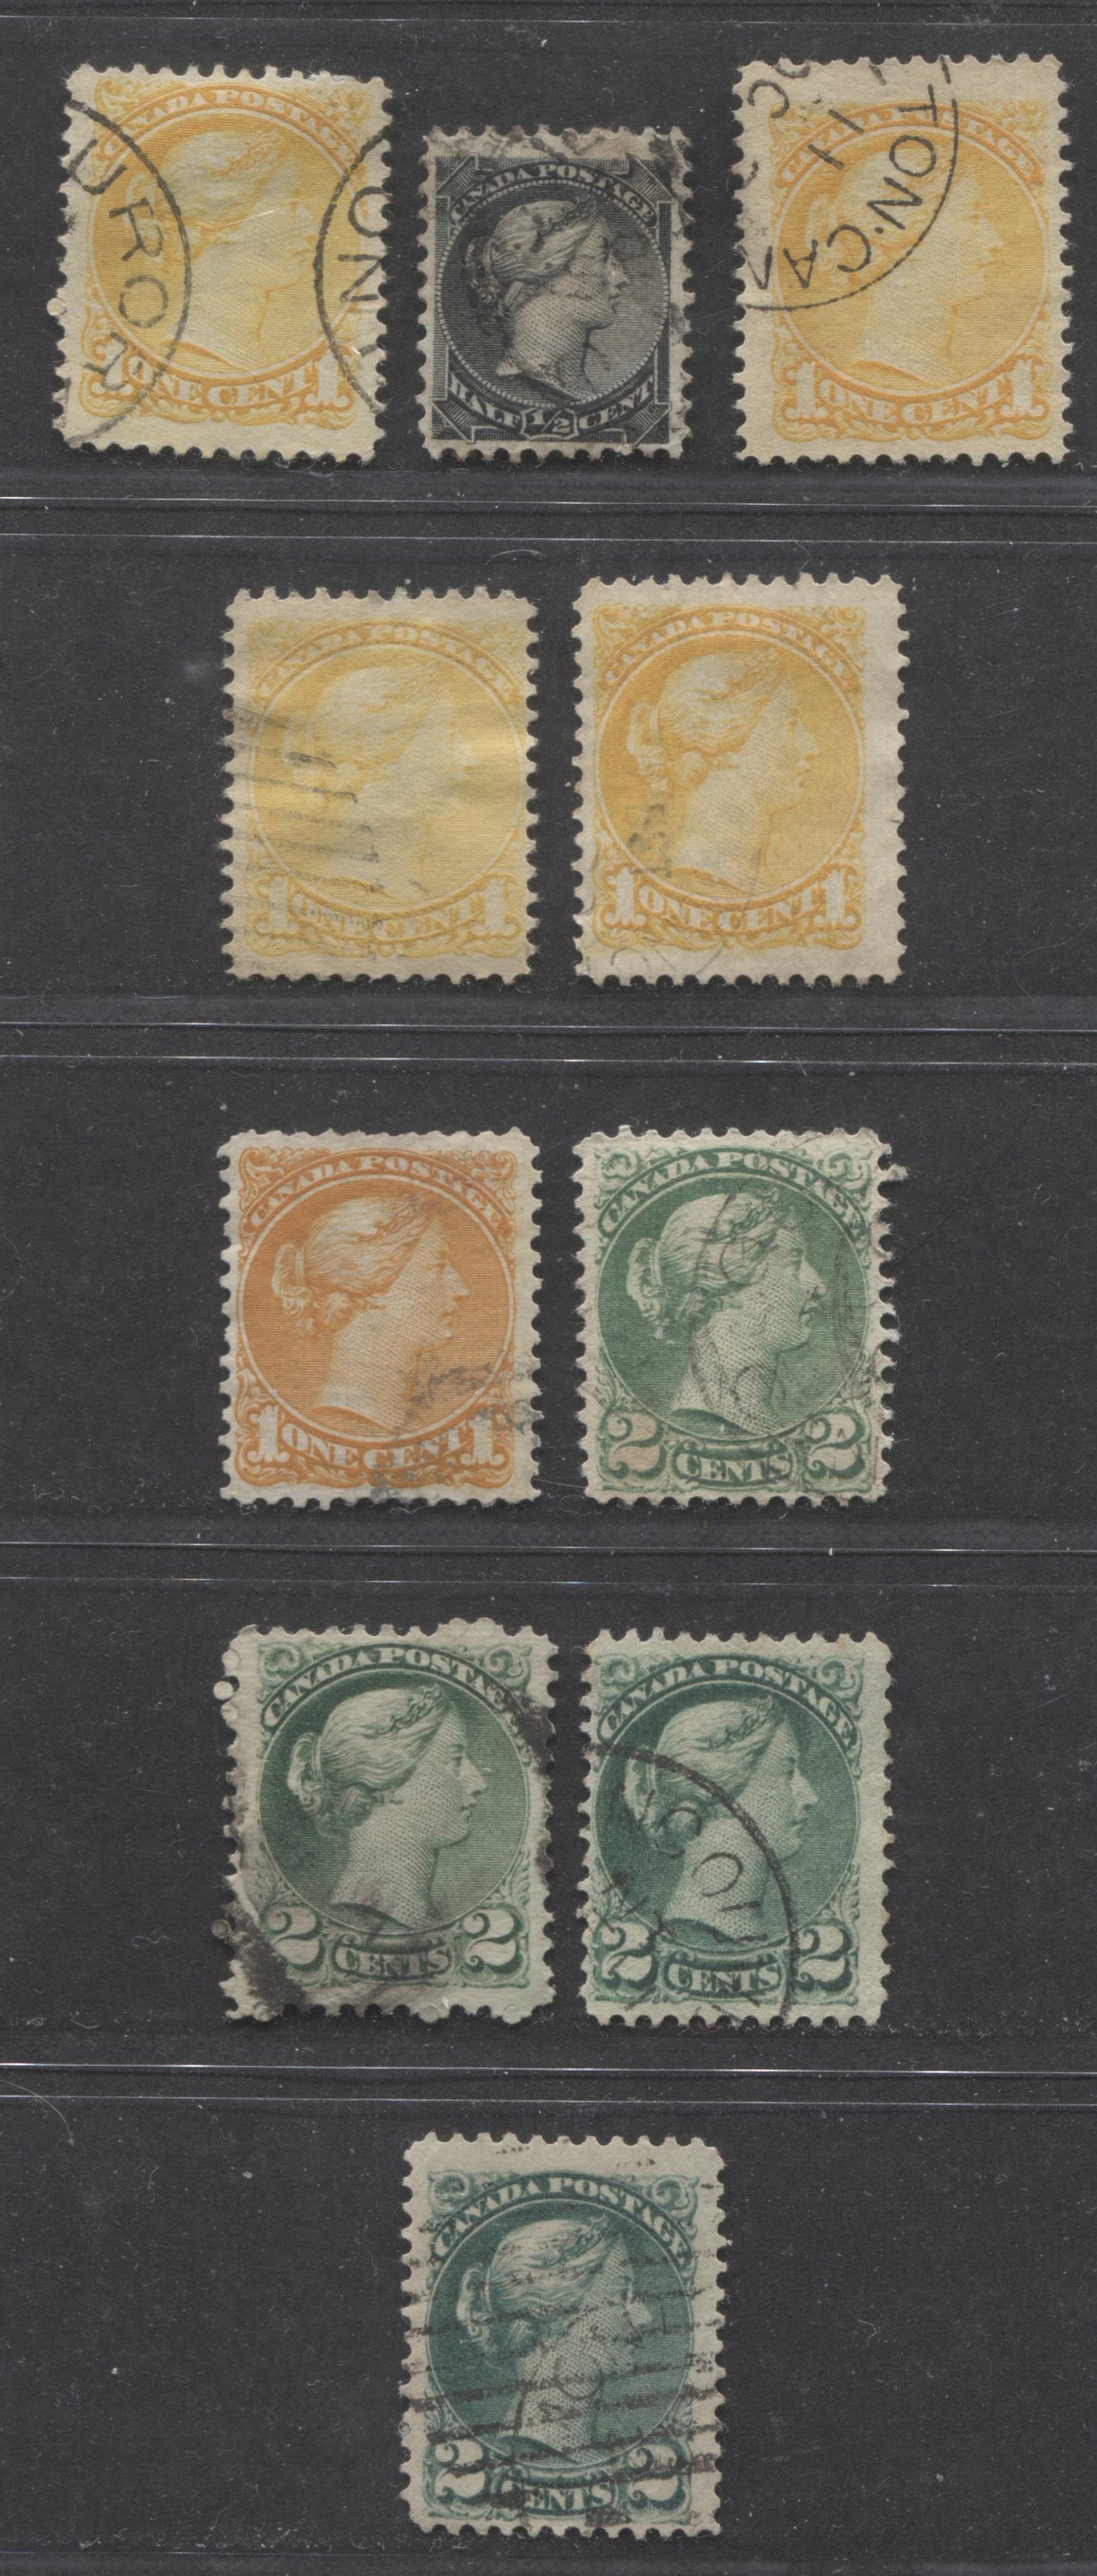 Lot 208 Canada #34, 35, 35i, 35iv, 36, 36i, 36d 1/2c, 1c, 2c Black, Yellow, Red Orange, Green & Blue Green Queen Victoria, 1870-1897 Small Queen Issue, 10 Fine Used Singles, All Different Papers and Shades, Montreal and 2nd Ottawa Printings